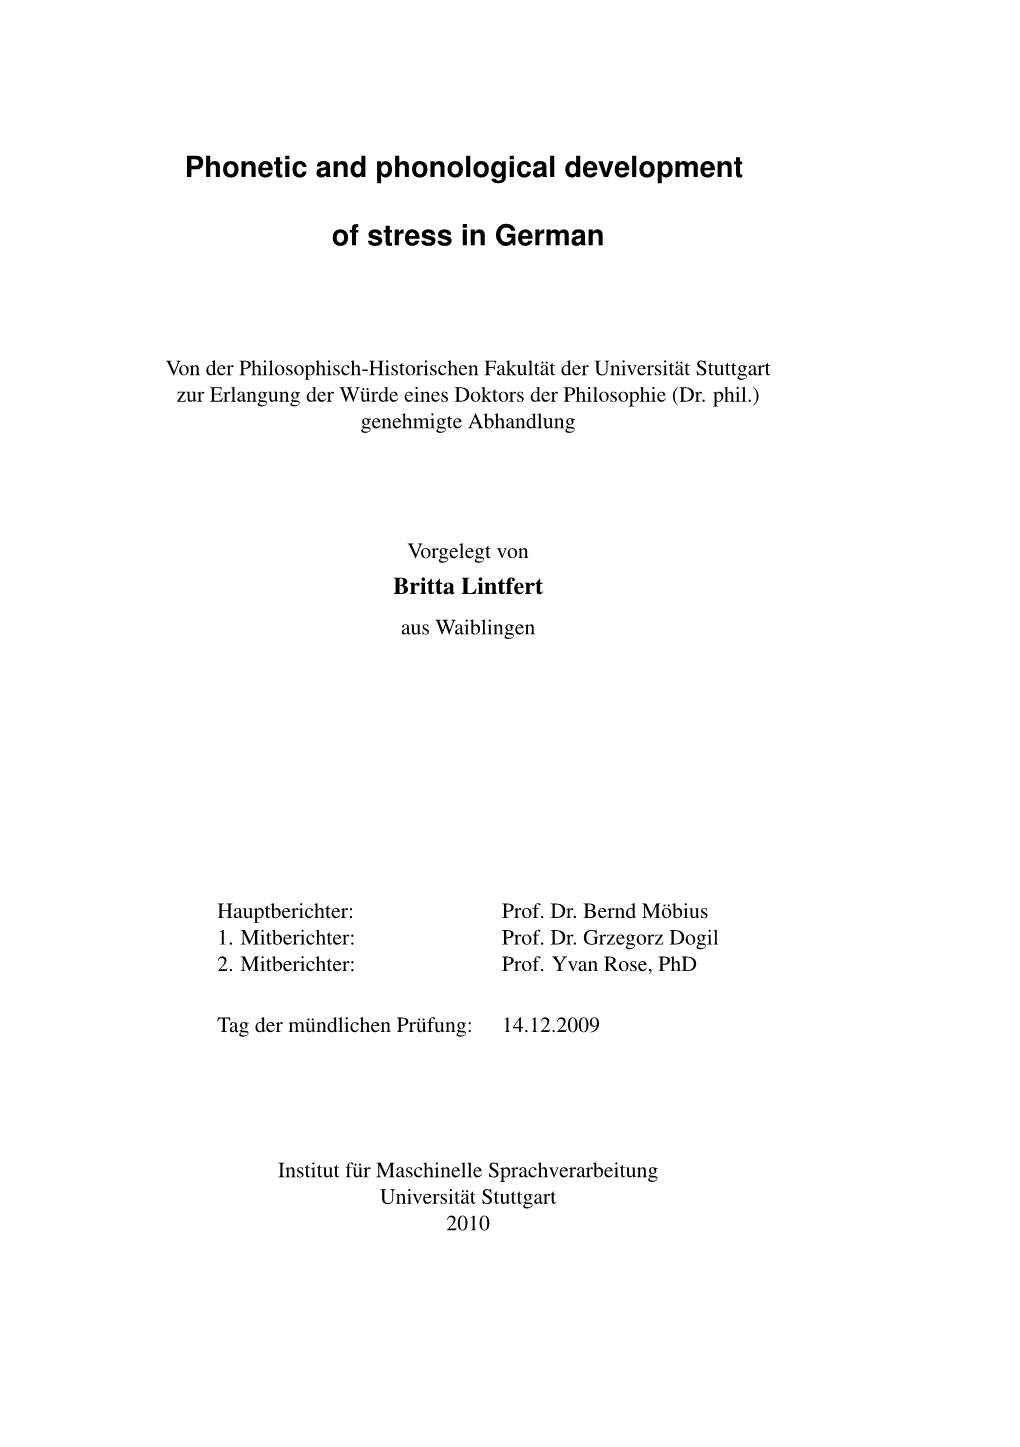 Phonetic and Phonological Development of Stress in German